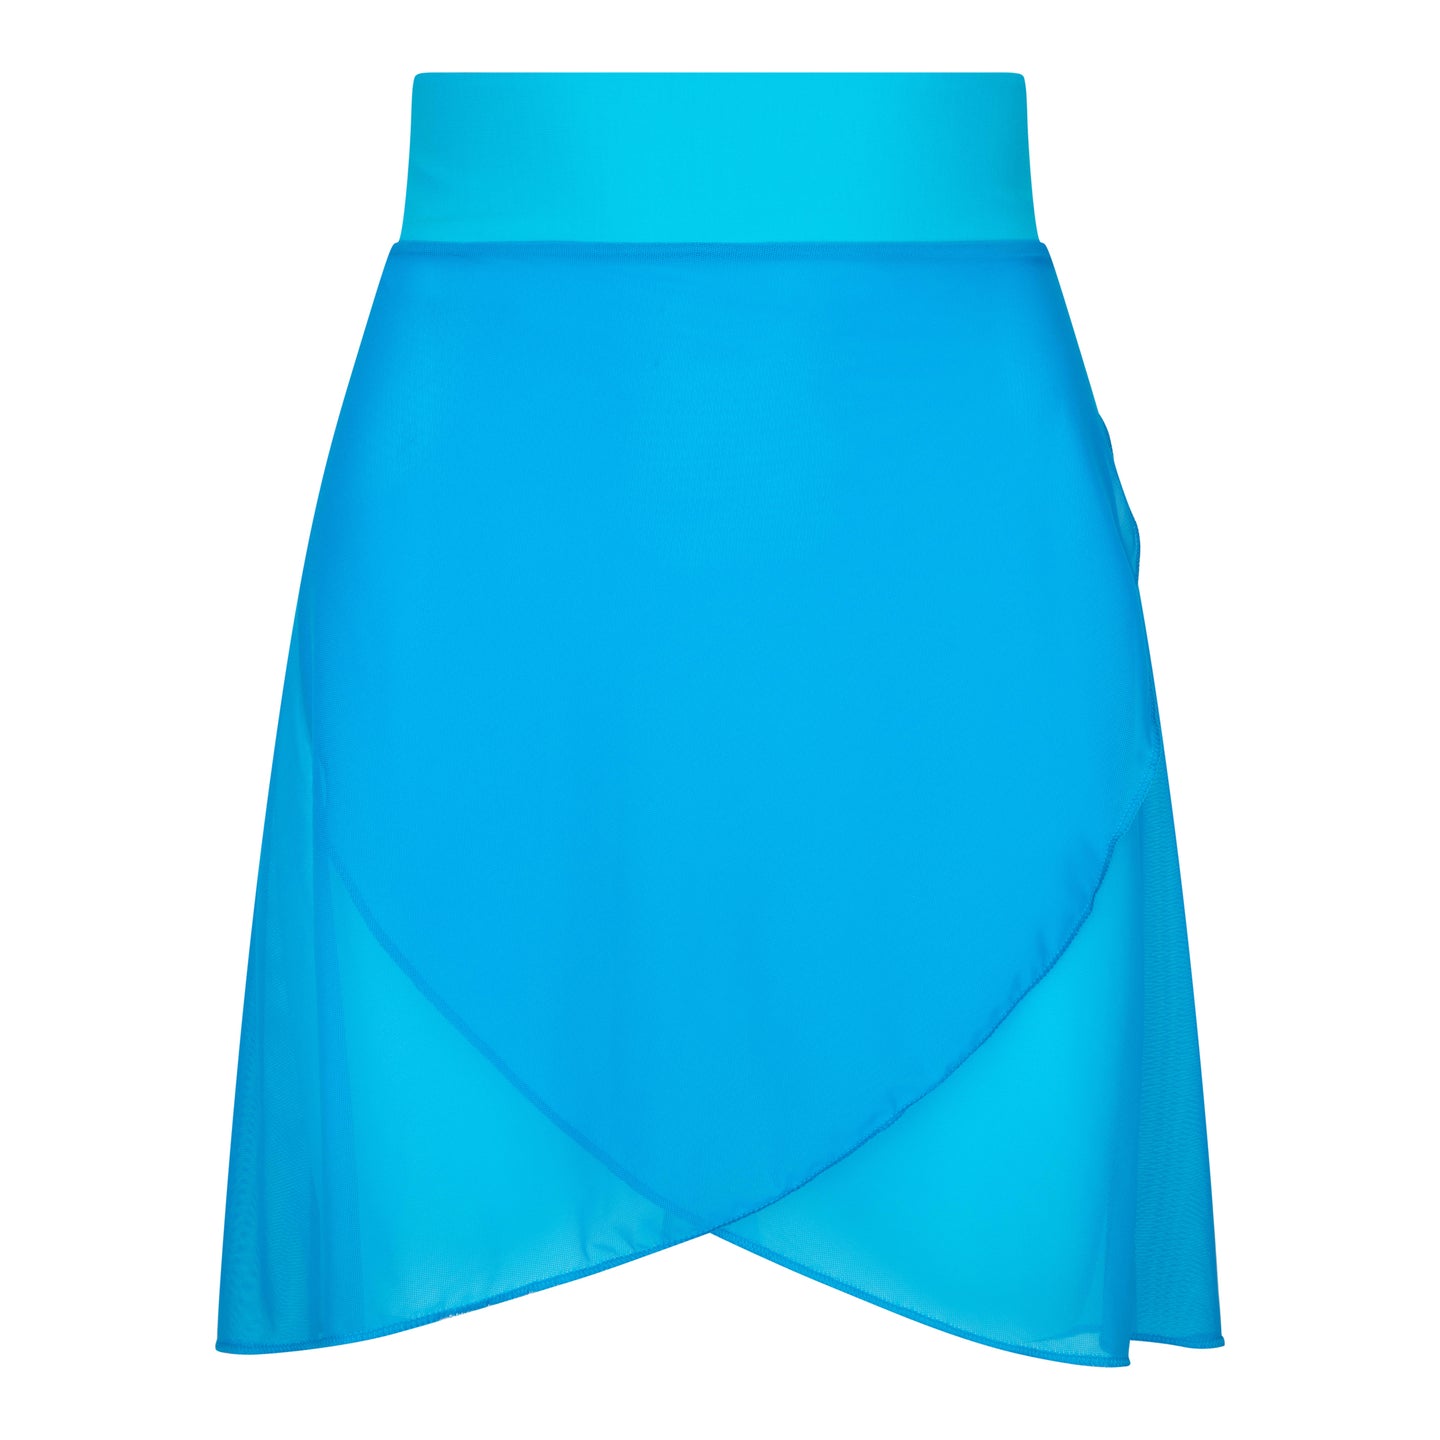 Turquoise Lux Wrap Skirt